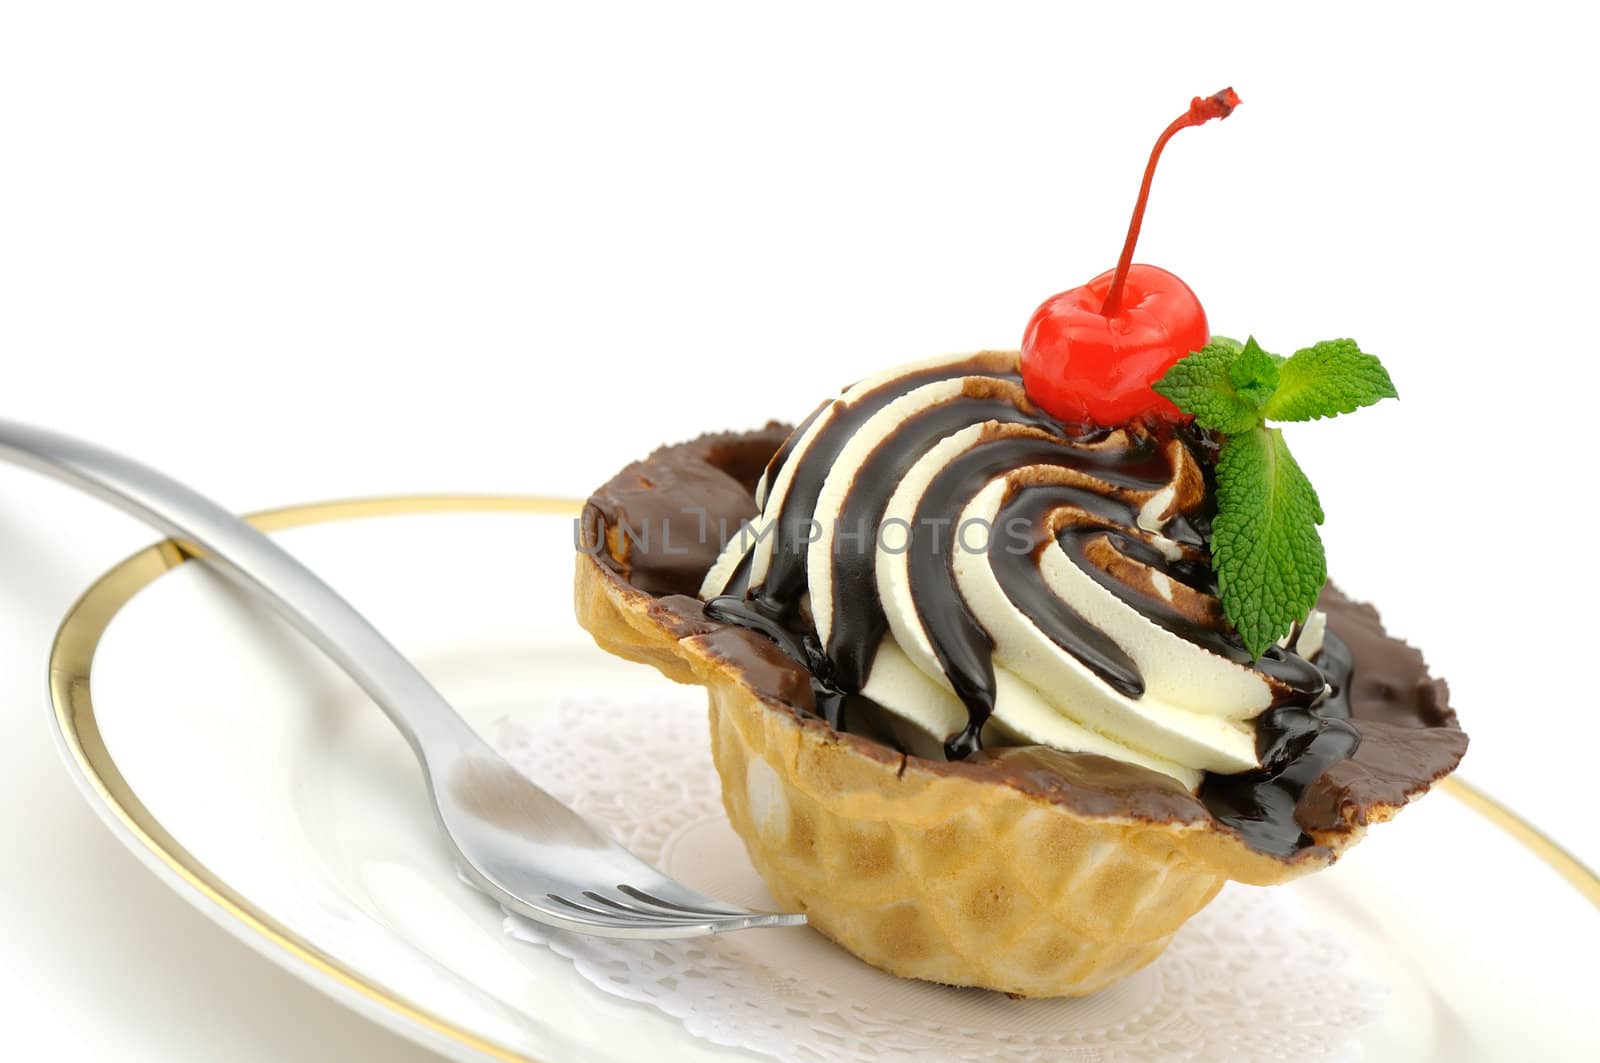 Delicious cream and chocolate cake in a wafer cup decorated with a candied cherry and mint leaves